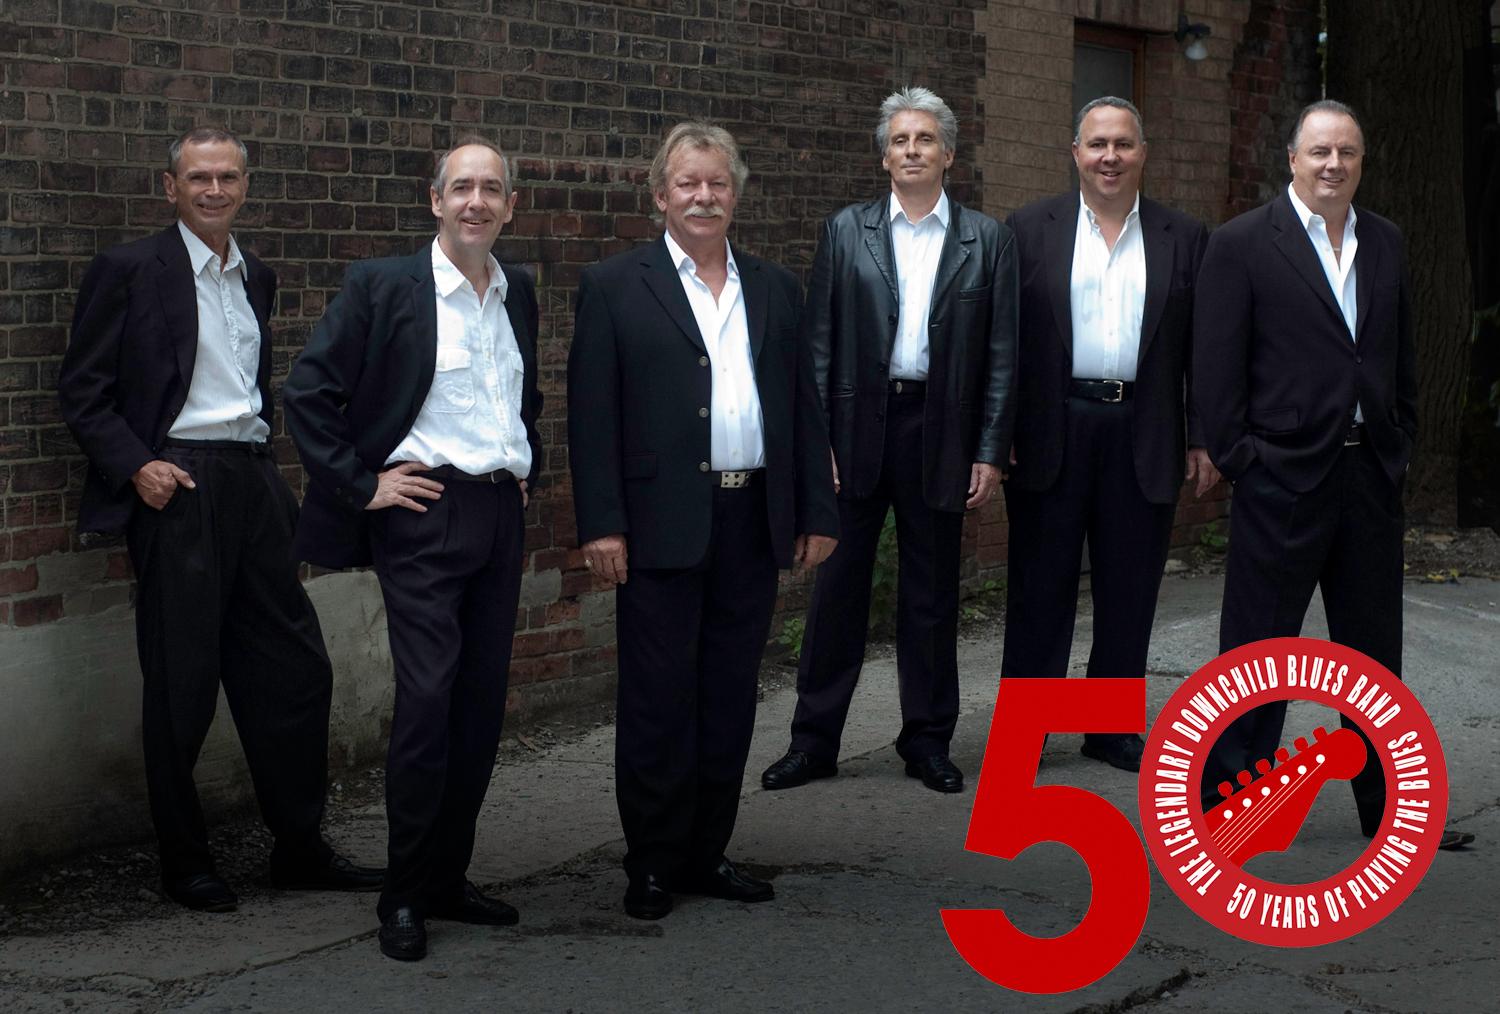 The Legendary Downchild Blues Band 50th Anniversary Tour